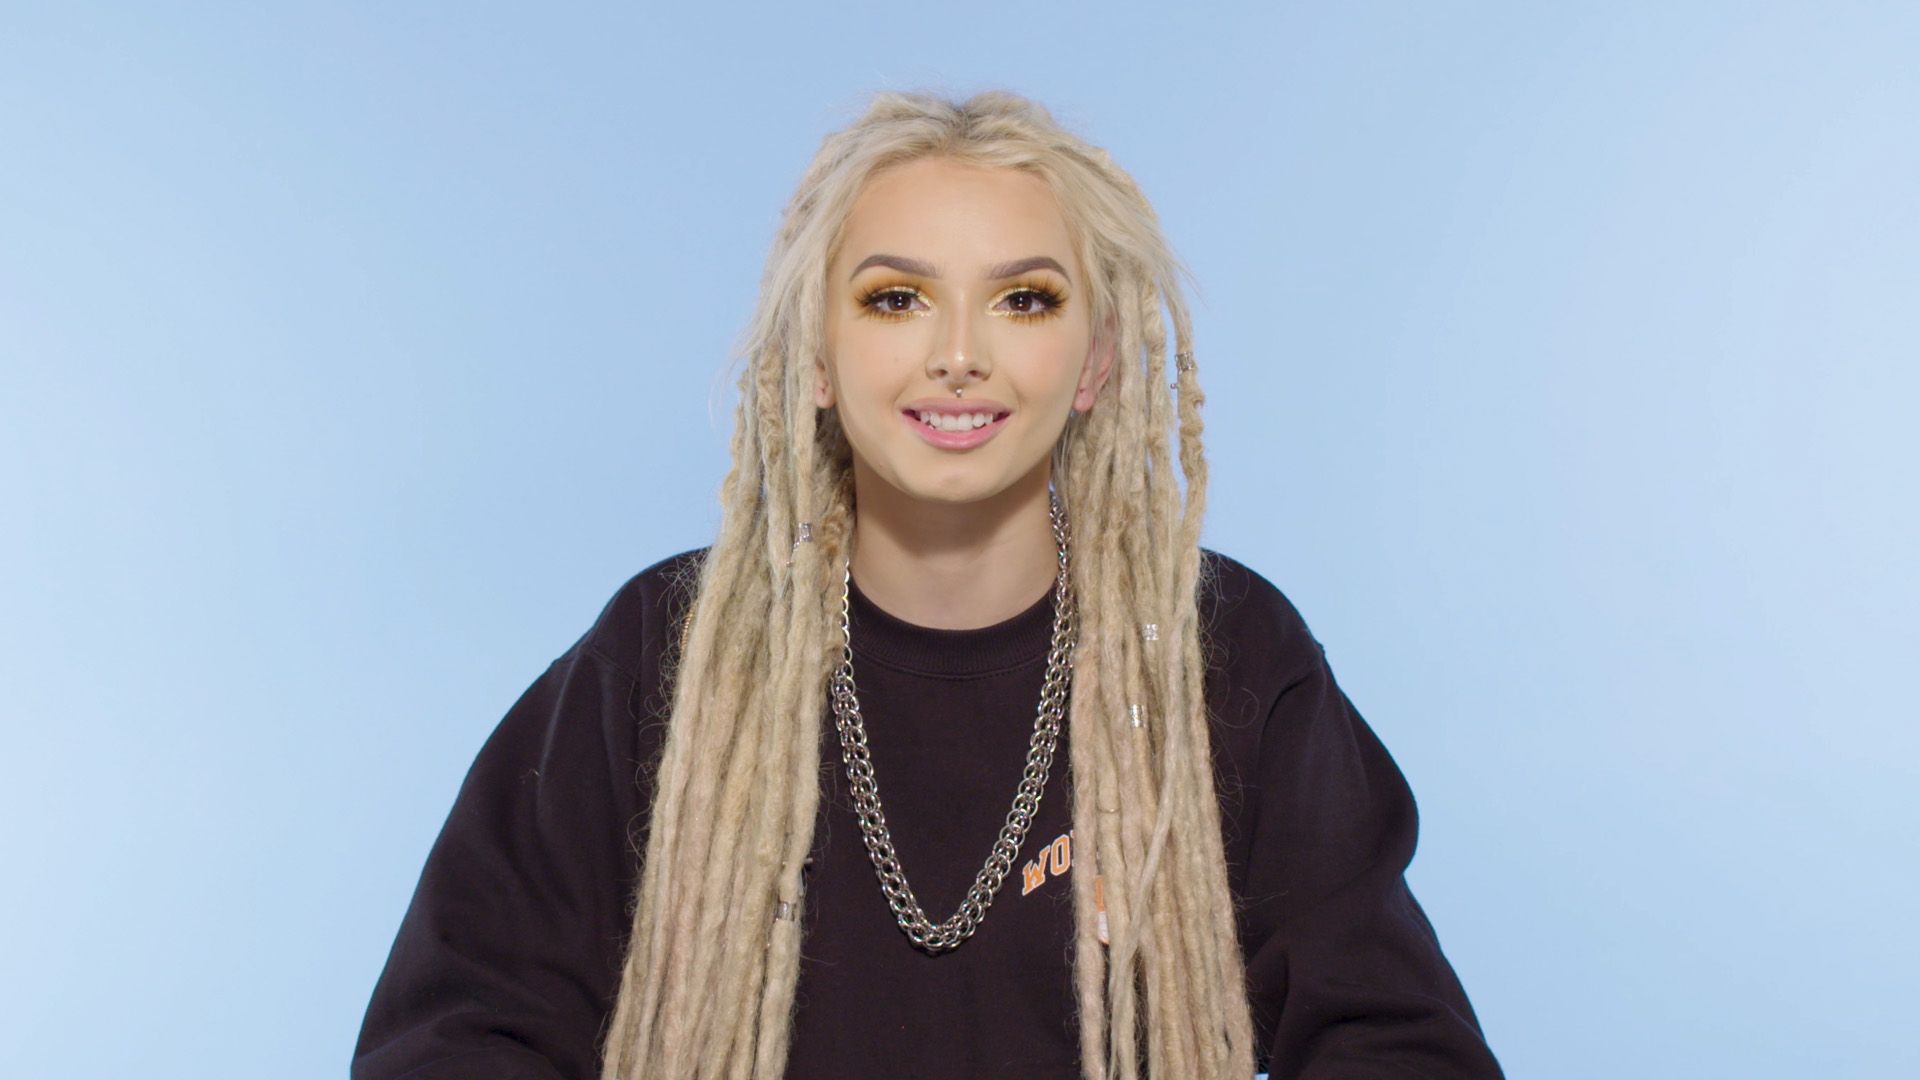 50 Facts about Zhavia Ward - Facts.net